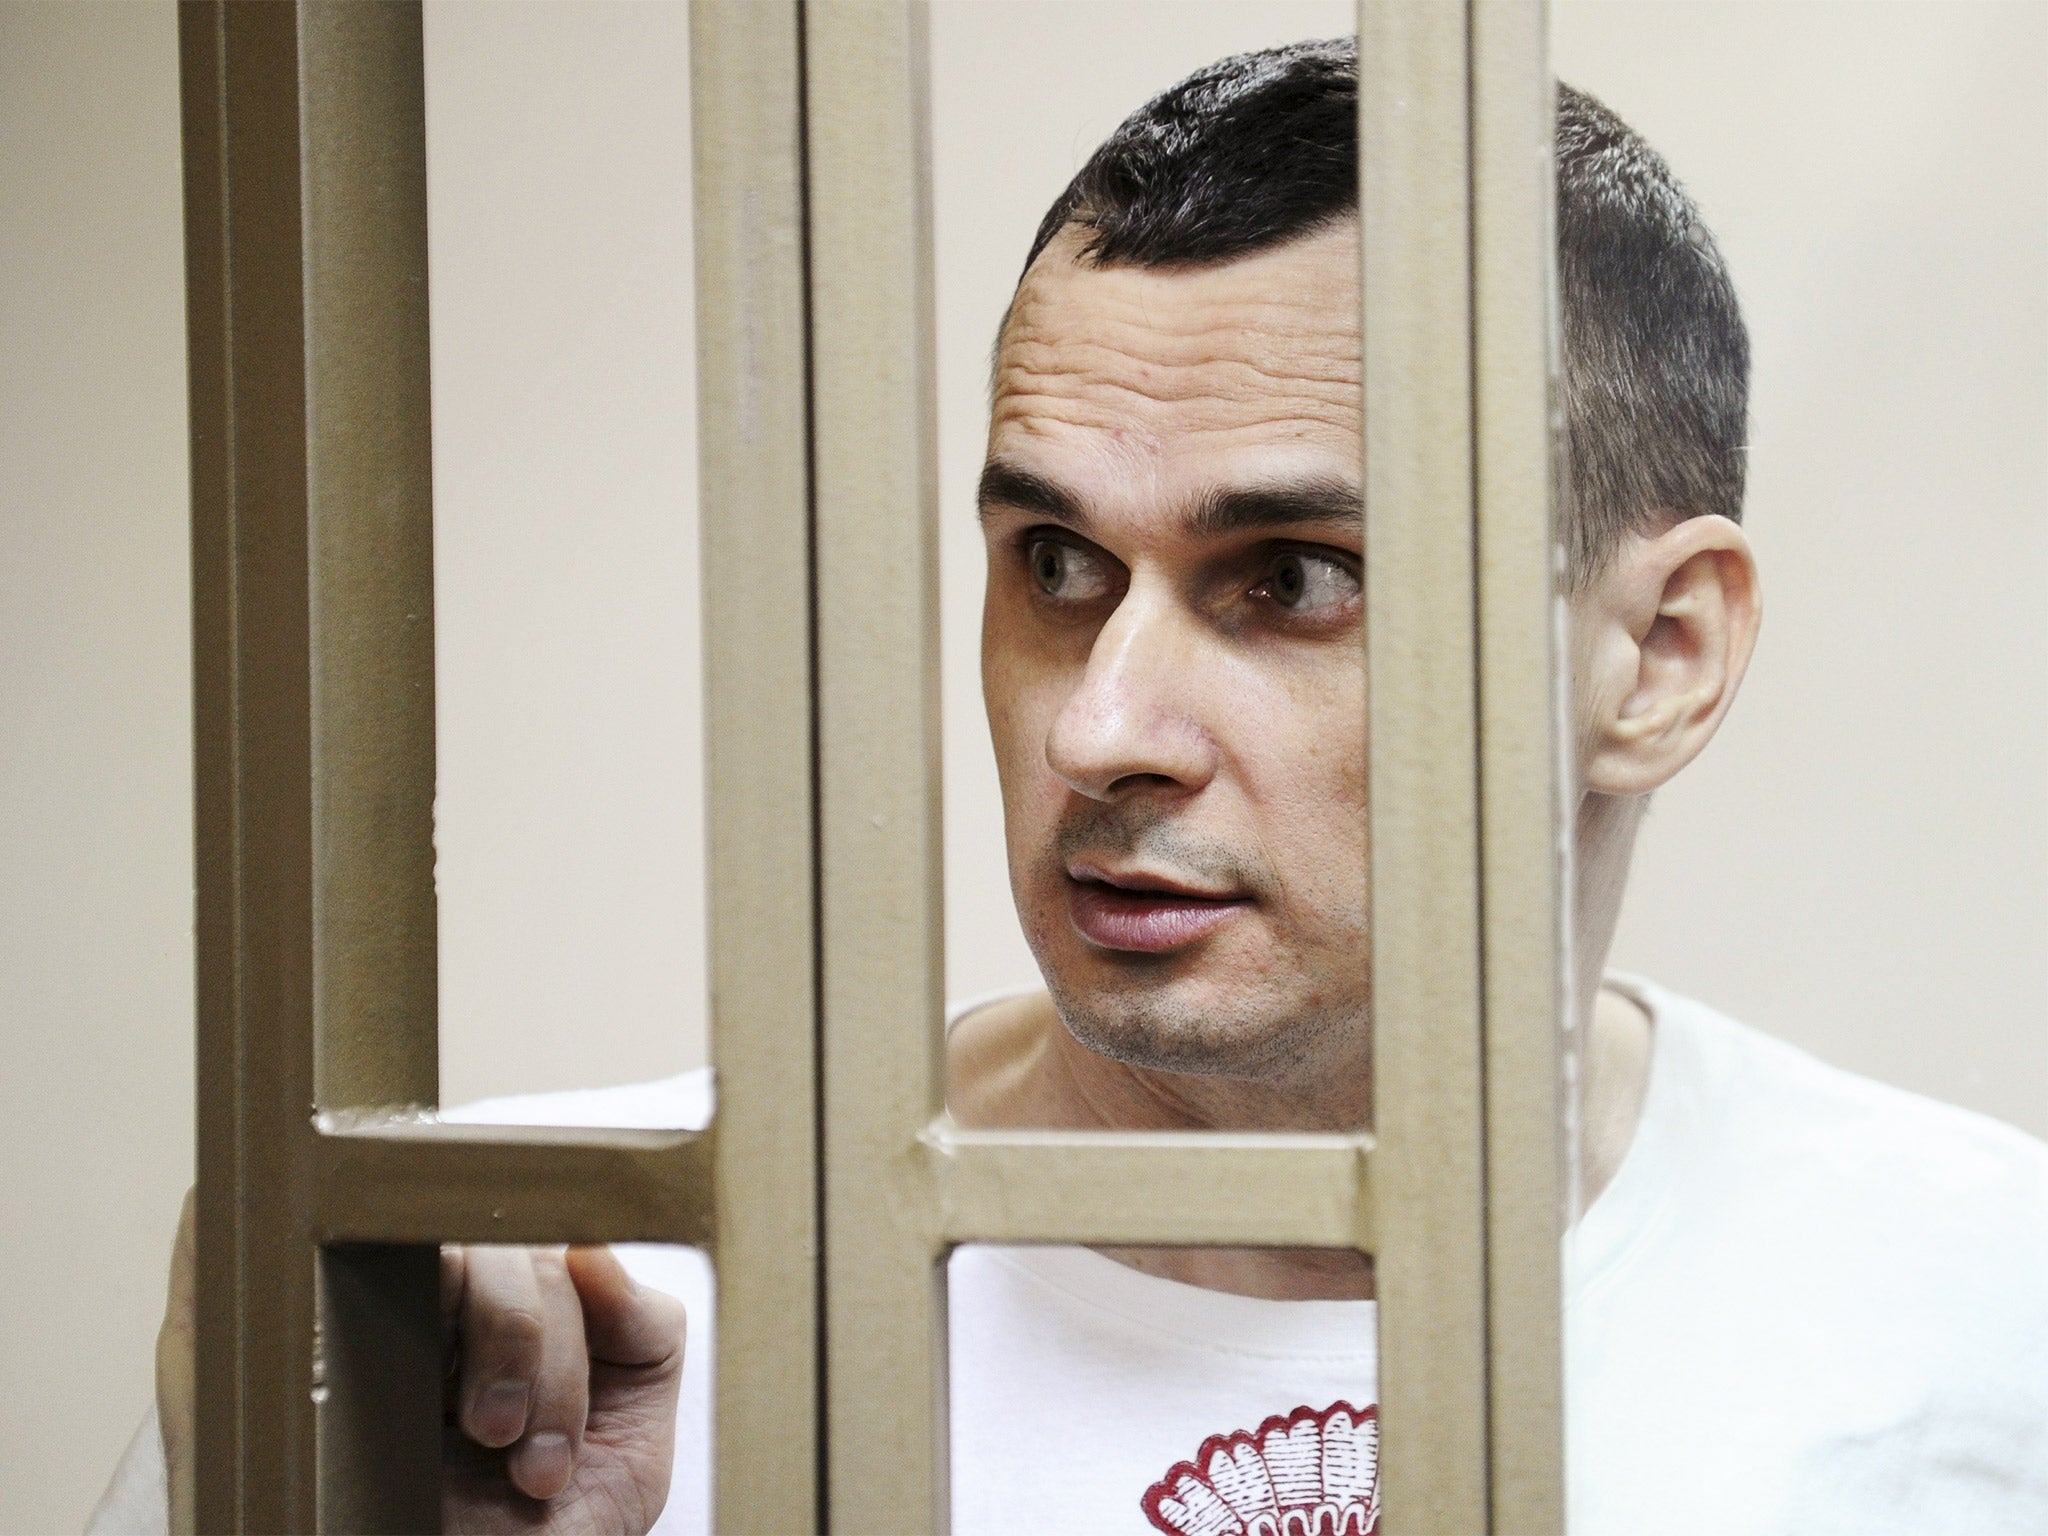 Oleg Sentsov was a vocal opponent of Russia’s 2014 annexation of Crimea